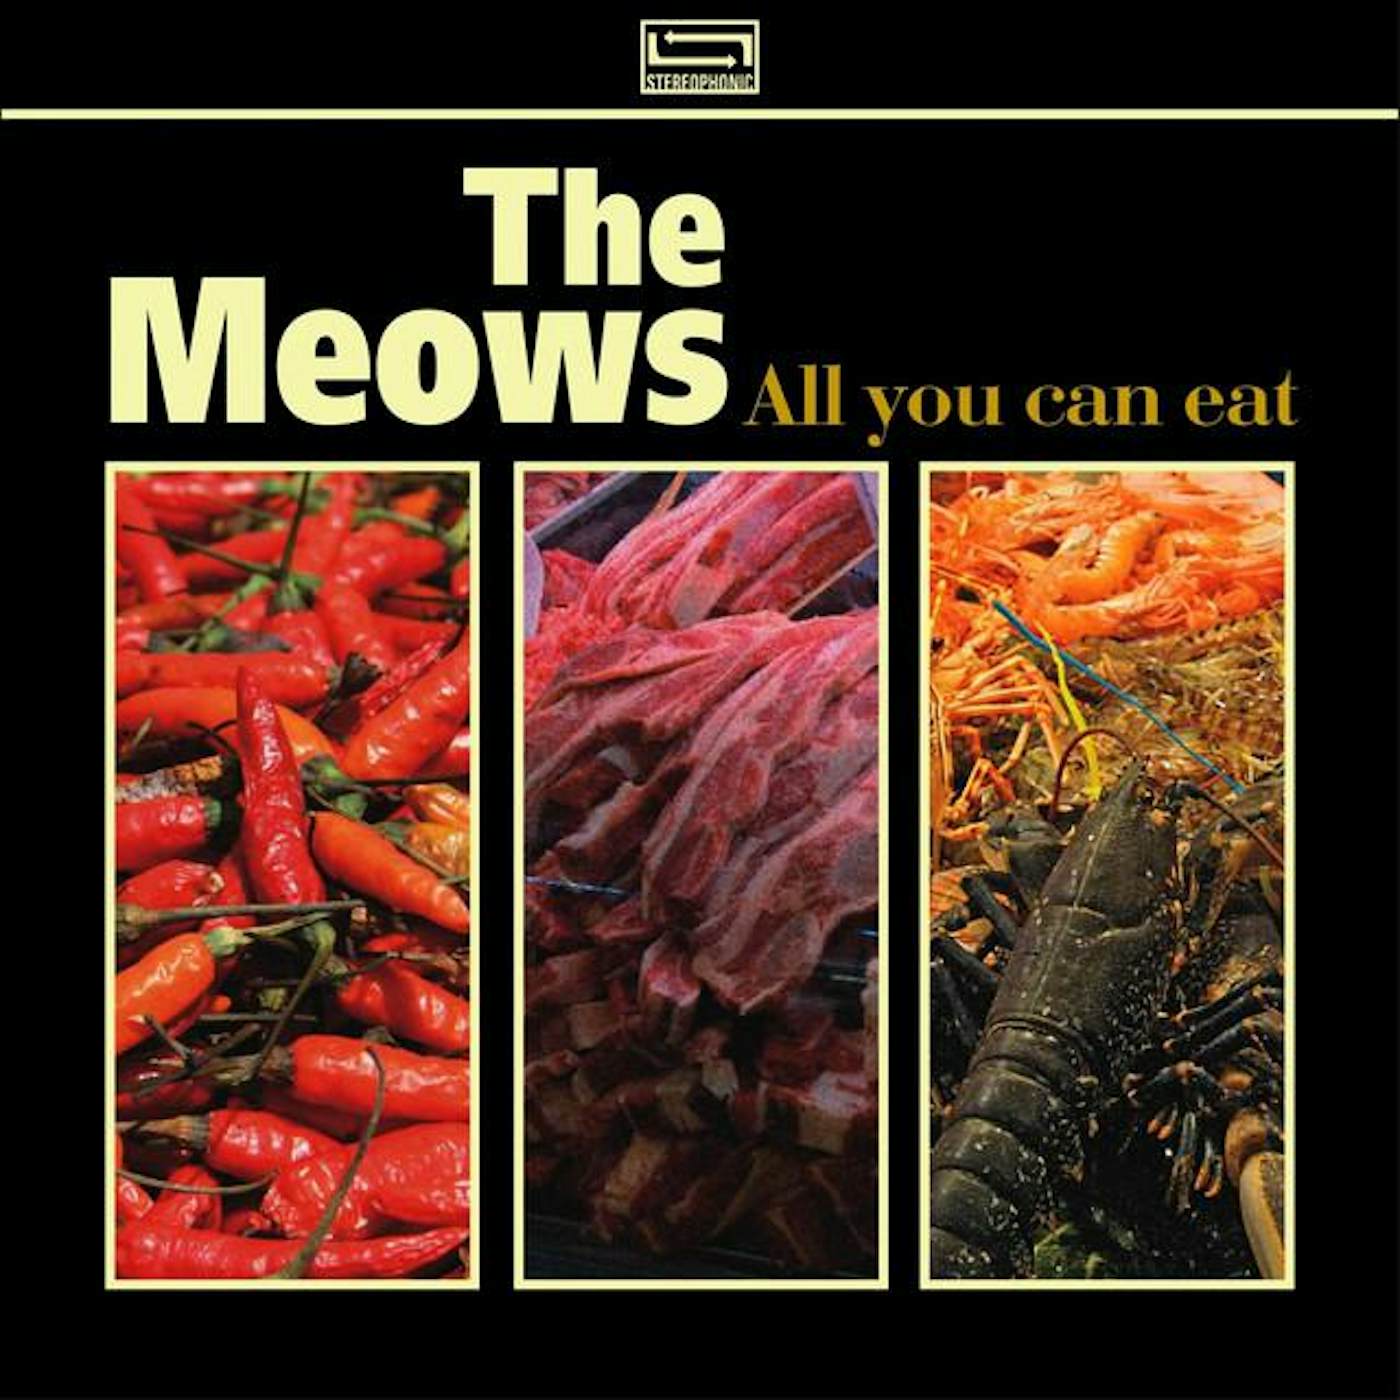 The Meows